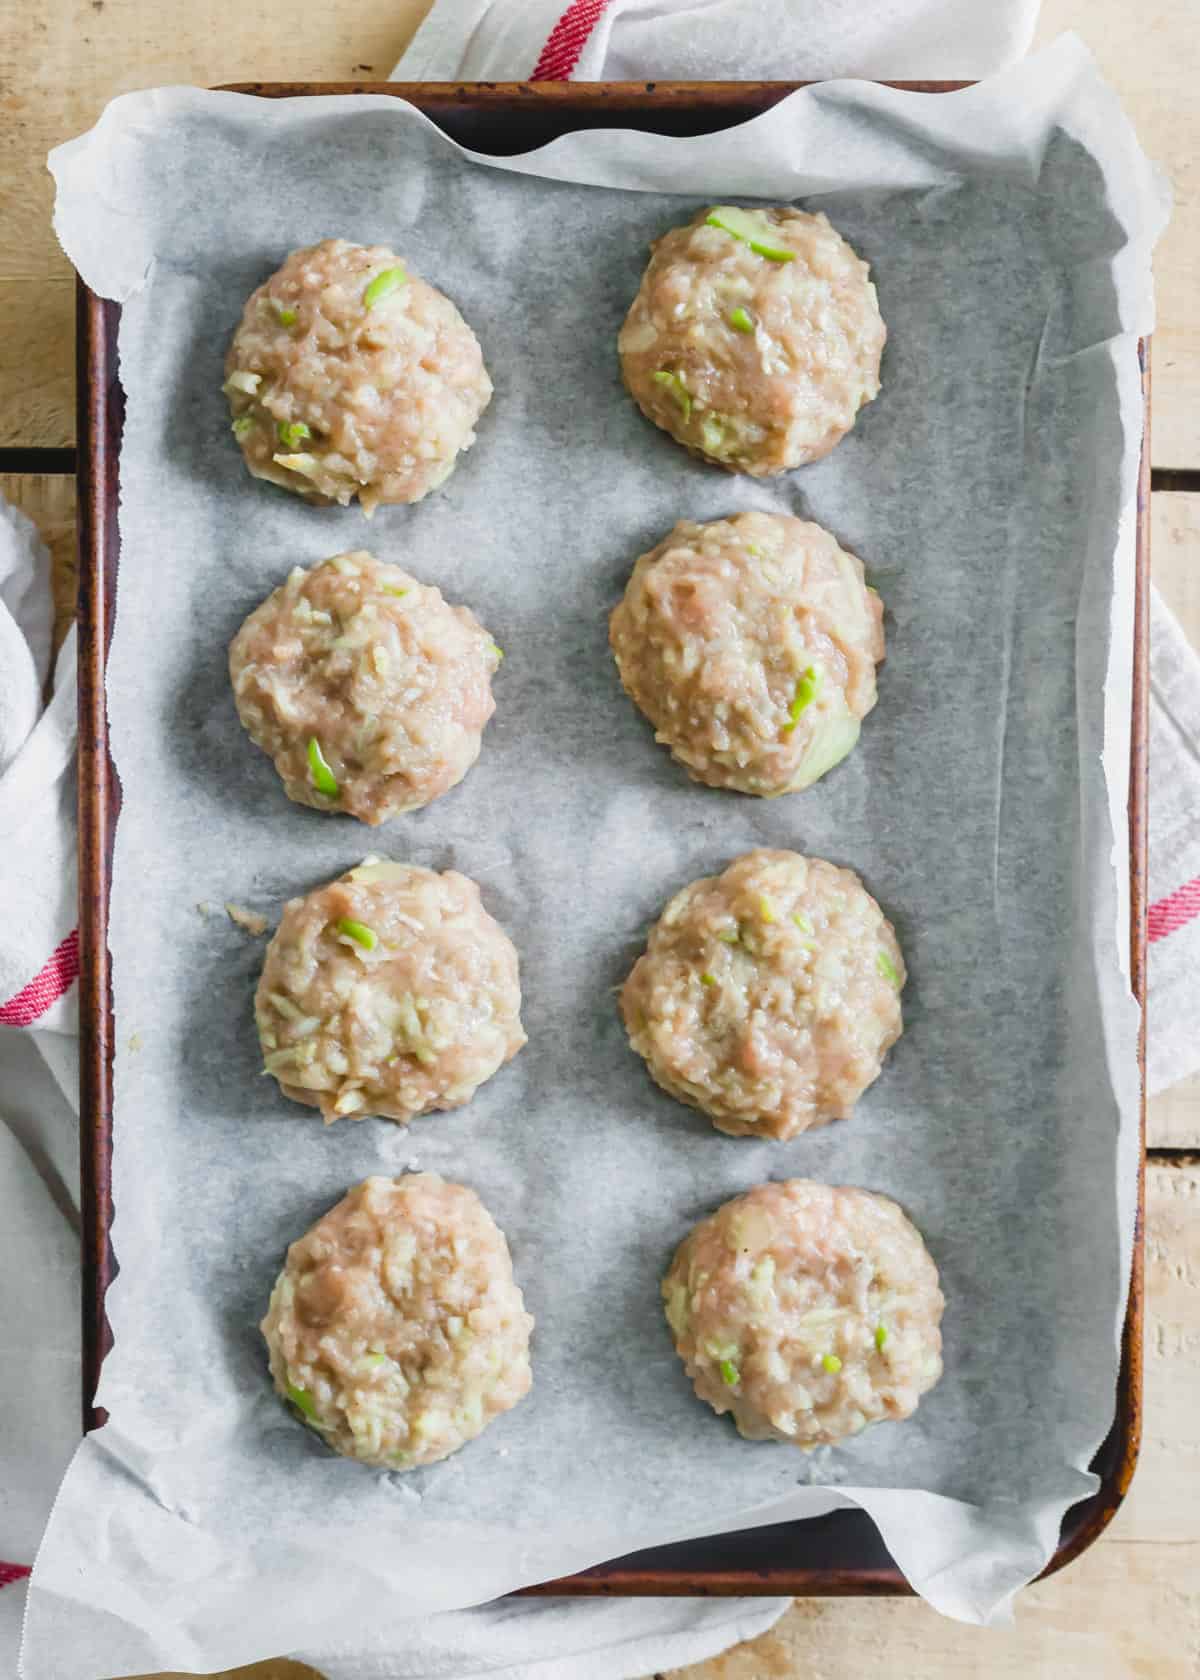 Prepared chicken sausage patties on a baking sheet lined with parchment paper.